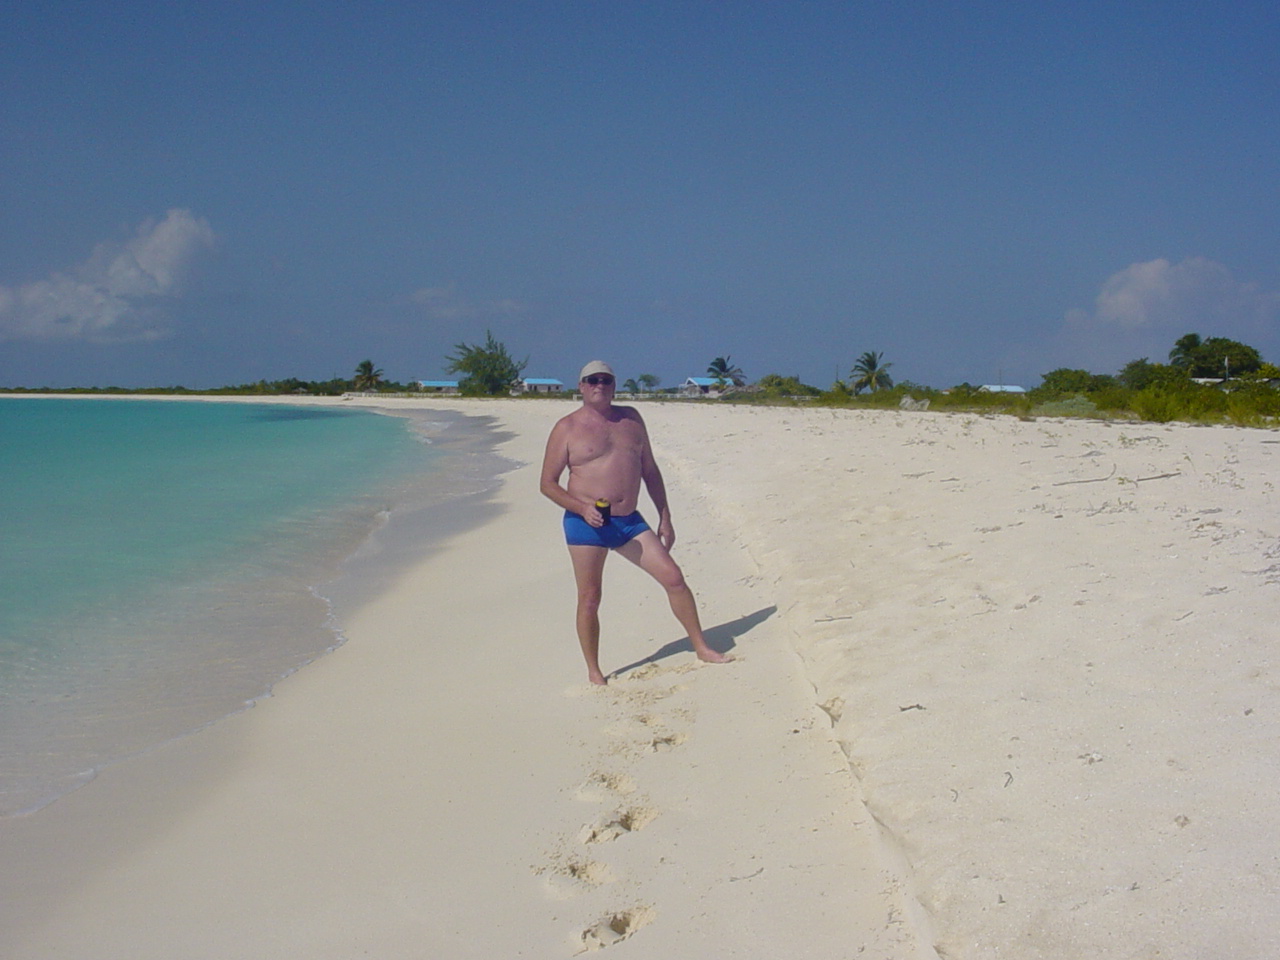 BEST BEACH EVER IN BARBUDA, DIDN'T REALLY NEED THE SUIT!